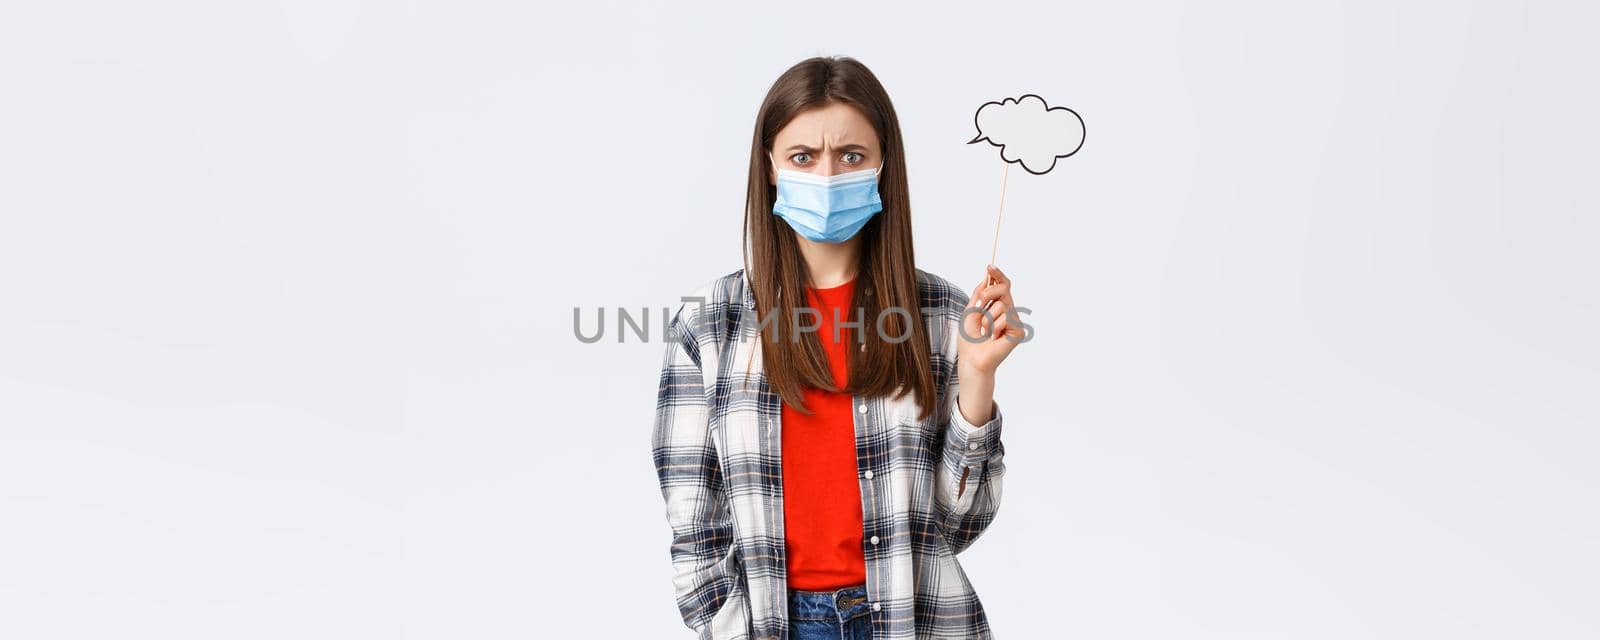 Coronavirus outbreak, leisure on quarantine, social distancing and emotions concept. Troubled young woman in medical mask frowing upset or disappointed, hold comment cloud stick near head.